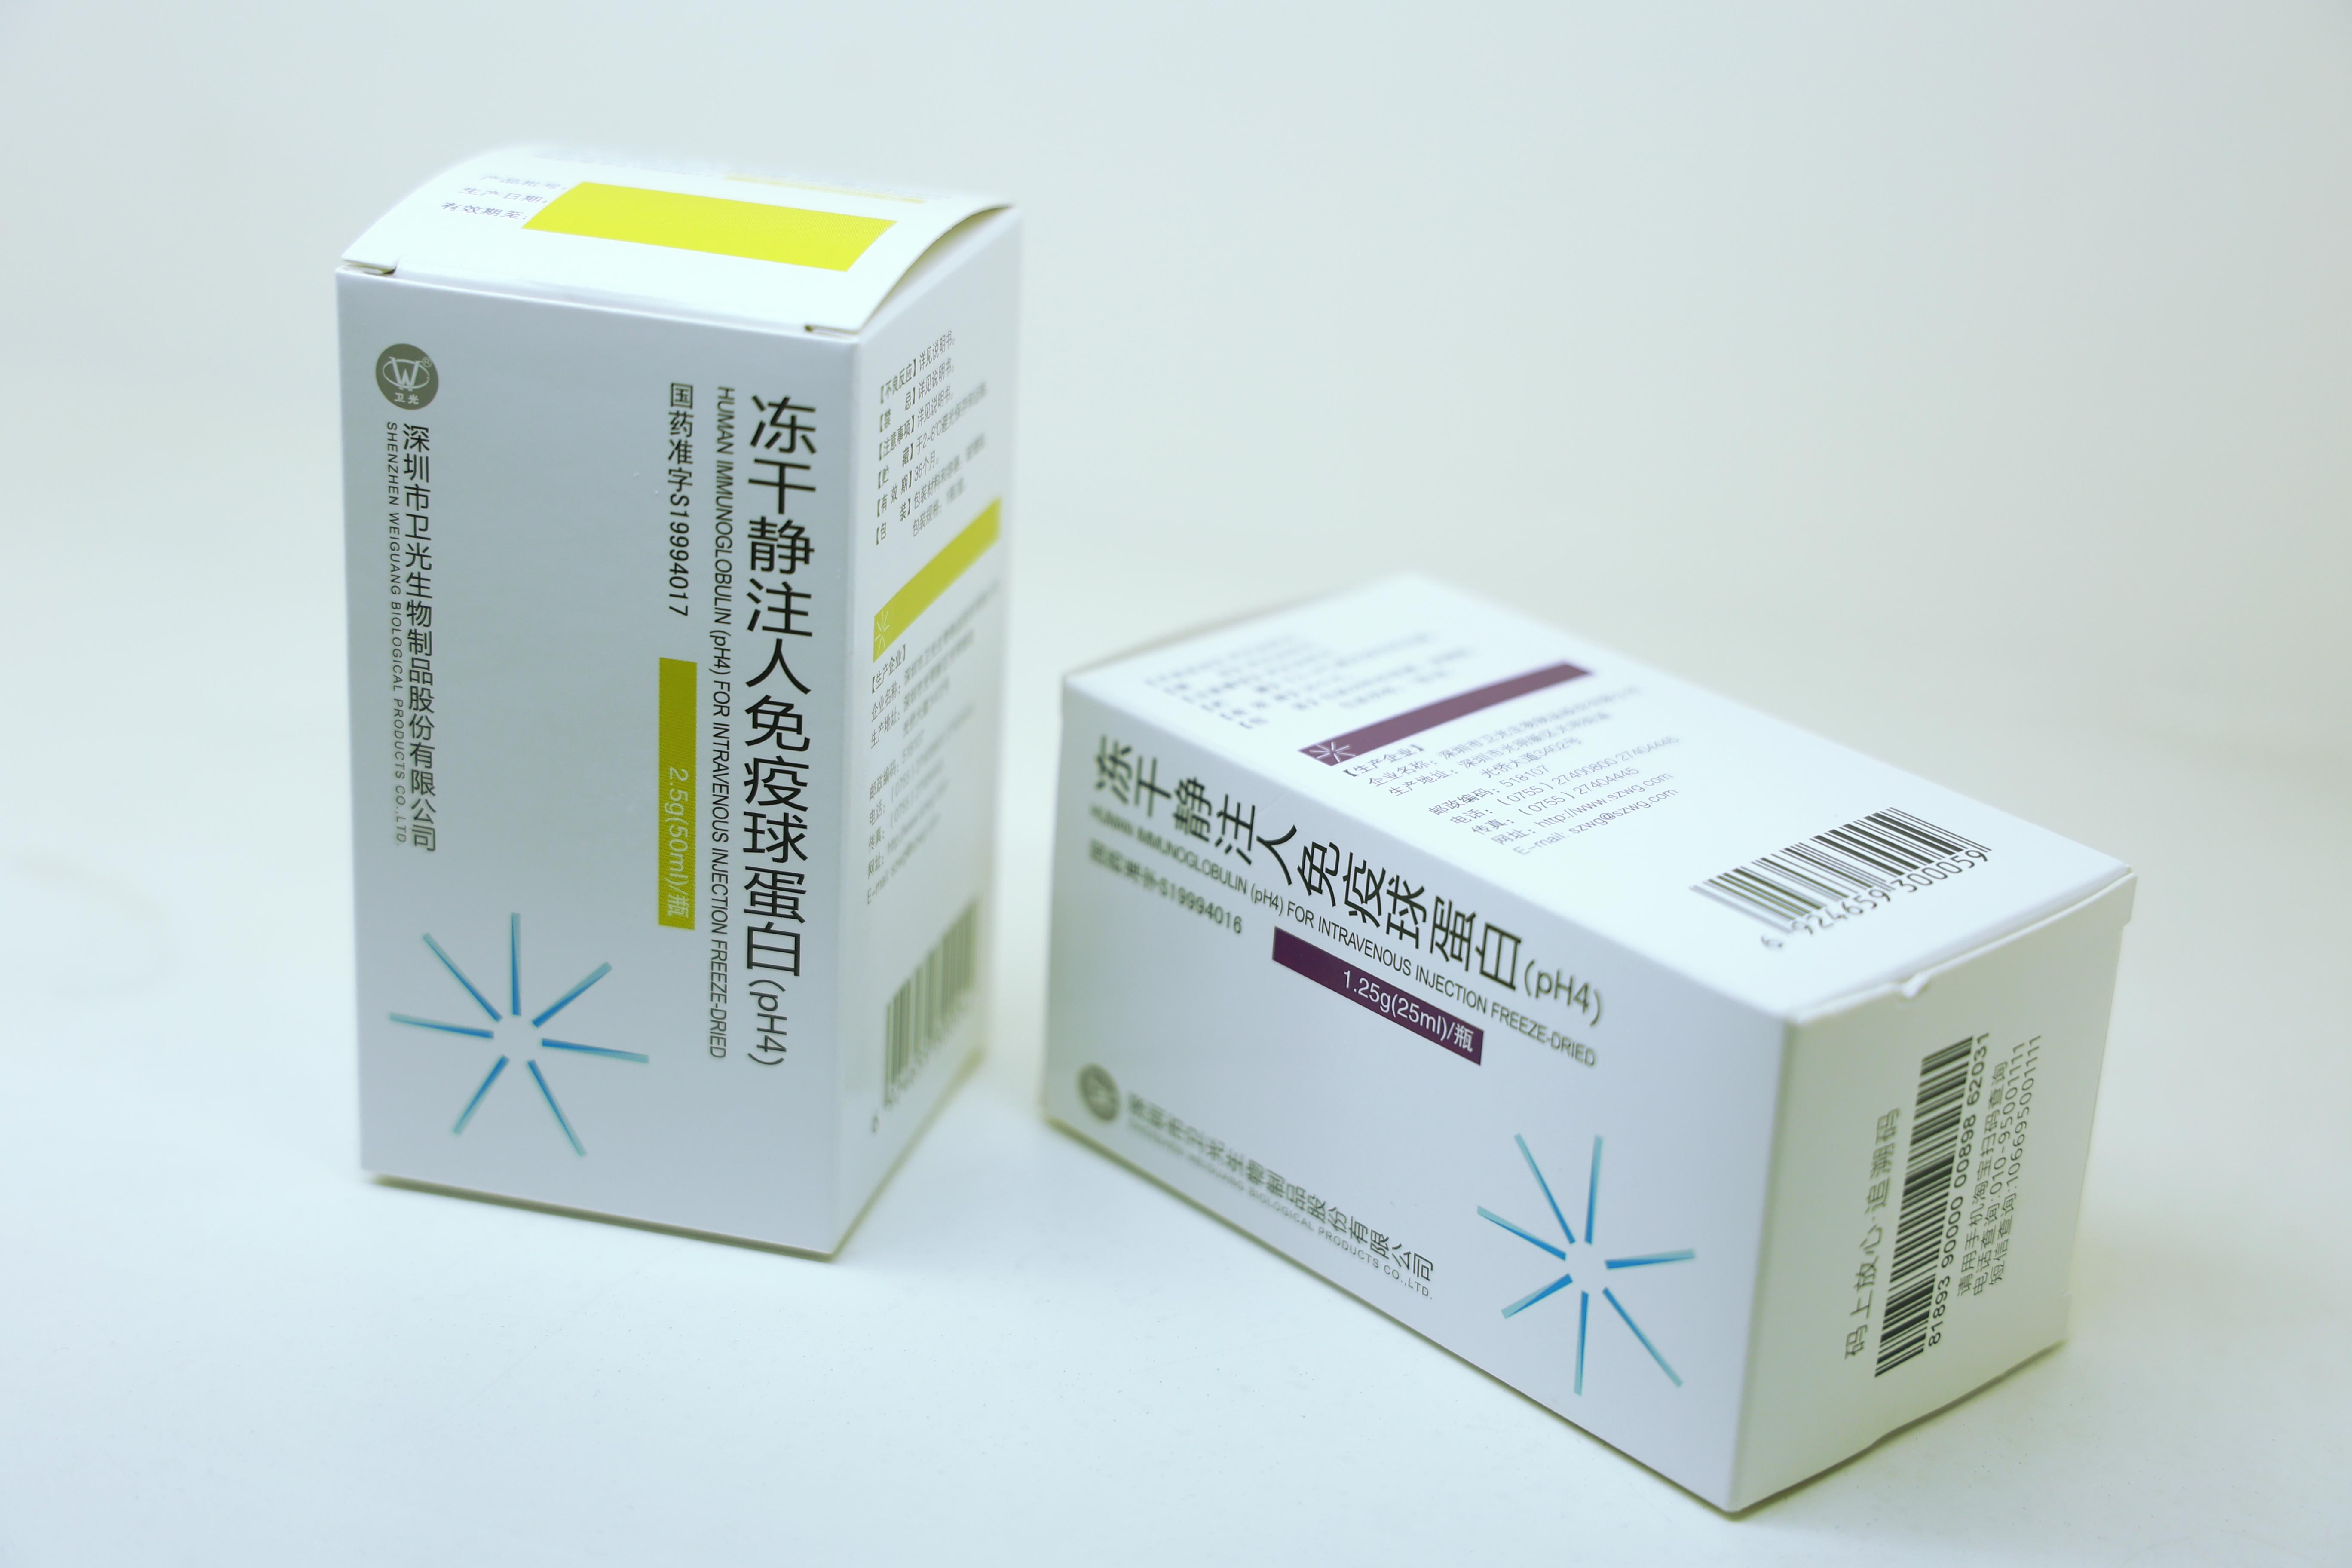 HUMAN IMMUNOGLOBILIN(PH4) FOR INTRAVENOUS INJECTION FREEZE-DRIED